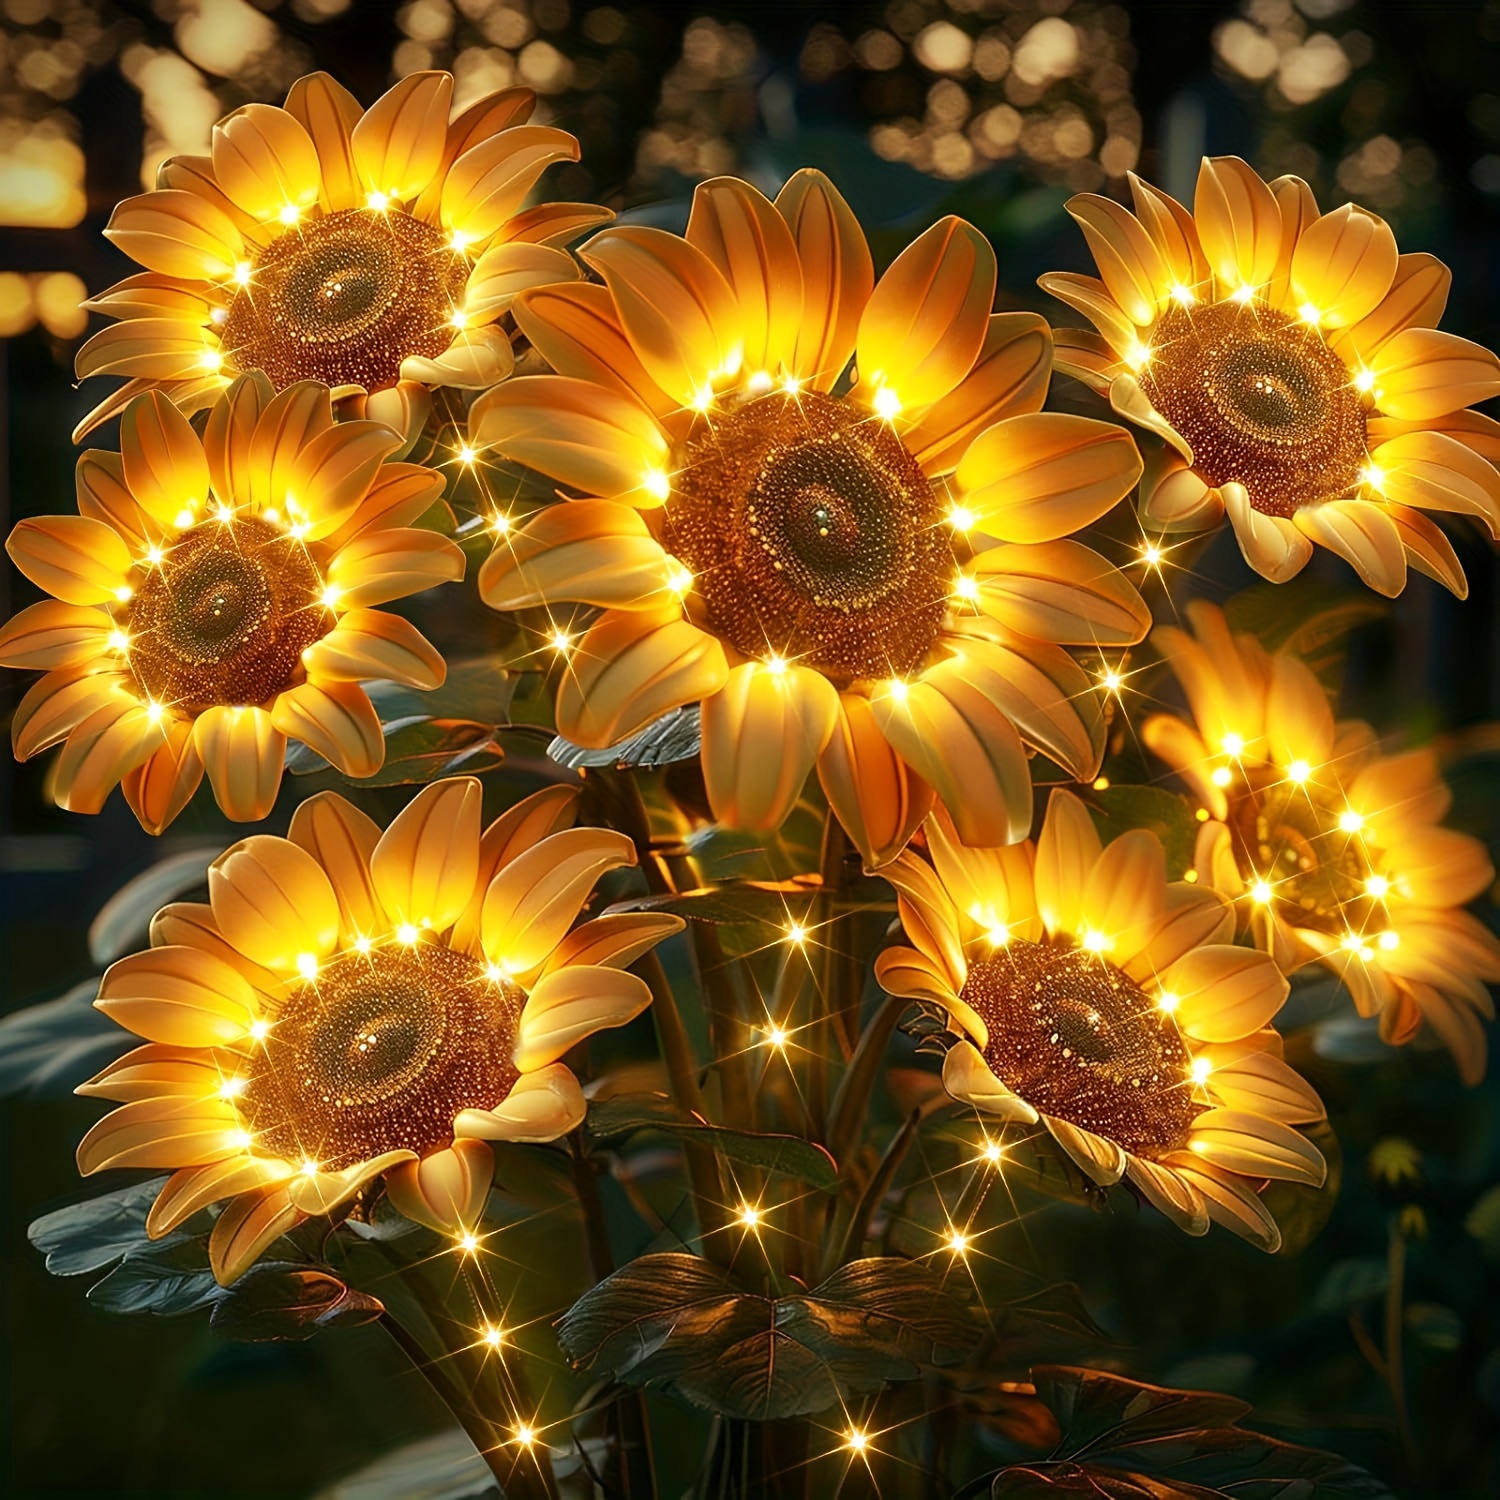 

Solar Lights Outdoor Garden Decor: 3 Pack Of 9 Sunflower Solar Lights For Outside, Artificial Sunflower Led Solar Flowers Outdoor Waterproof, Pathway Landscape Yard Decorations, Unique Gifts For Women